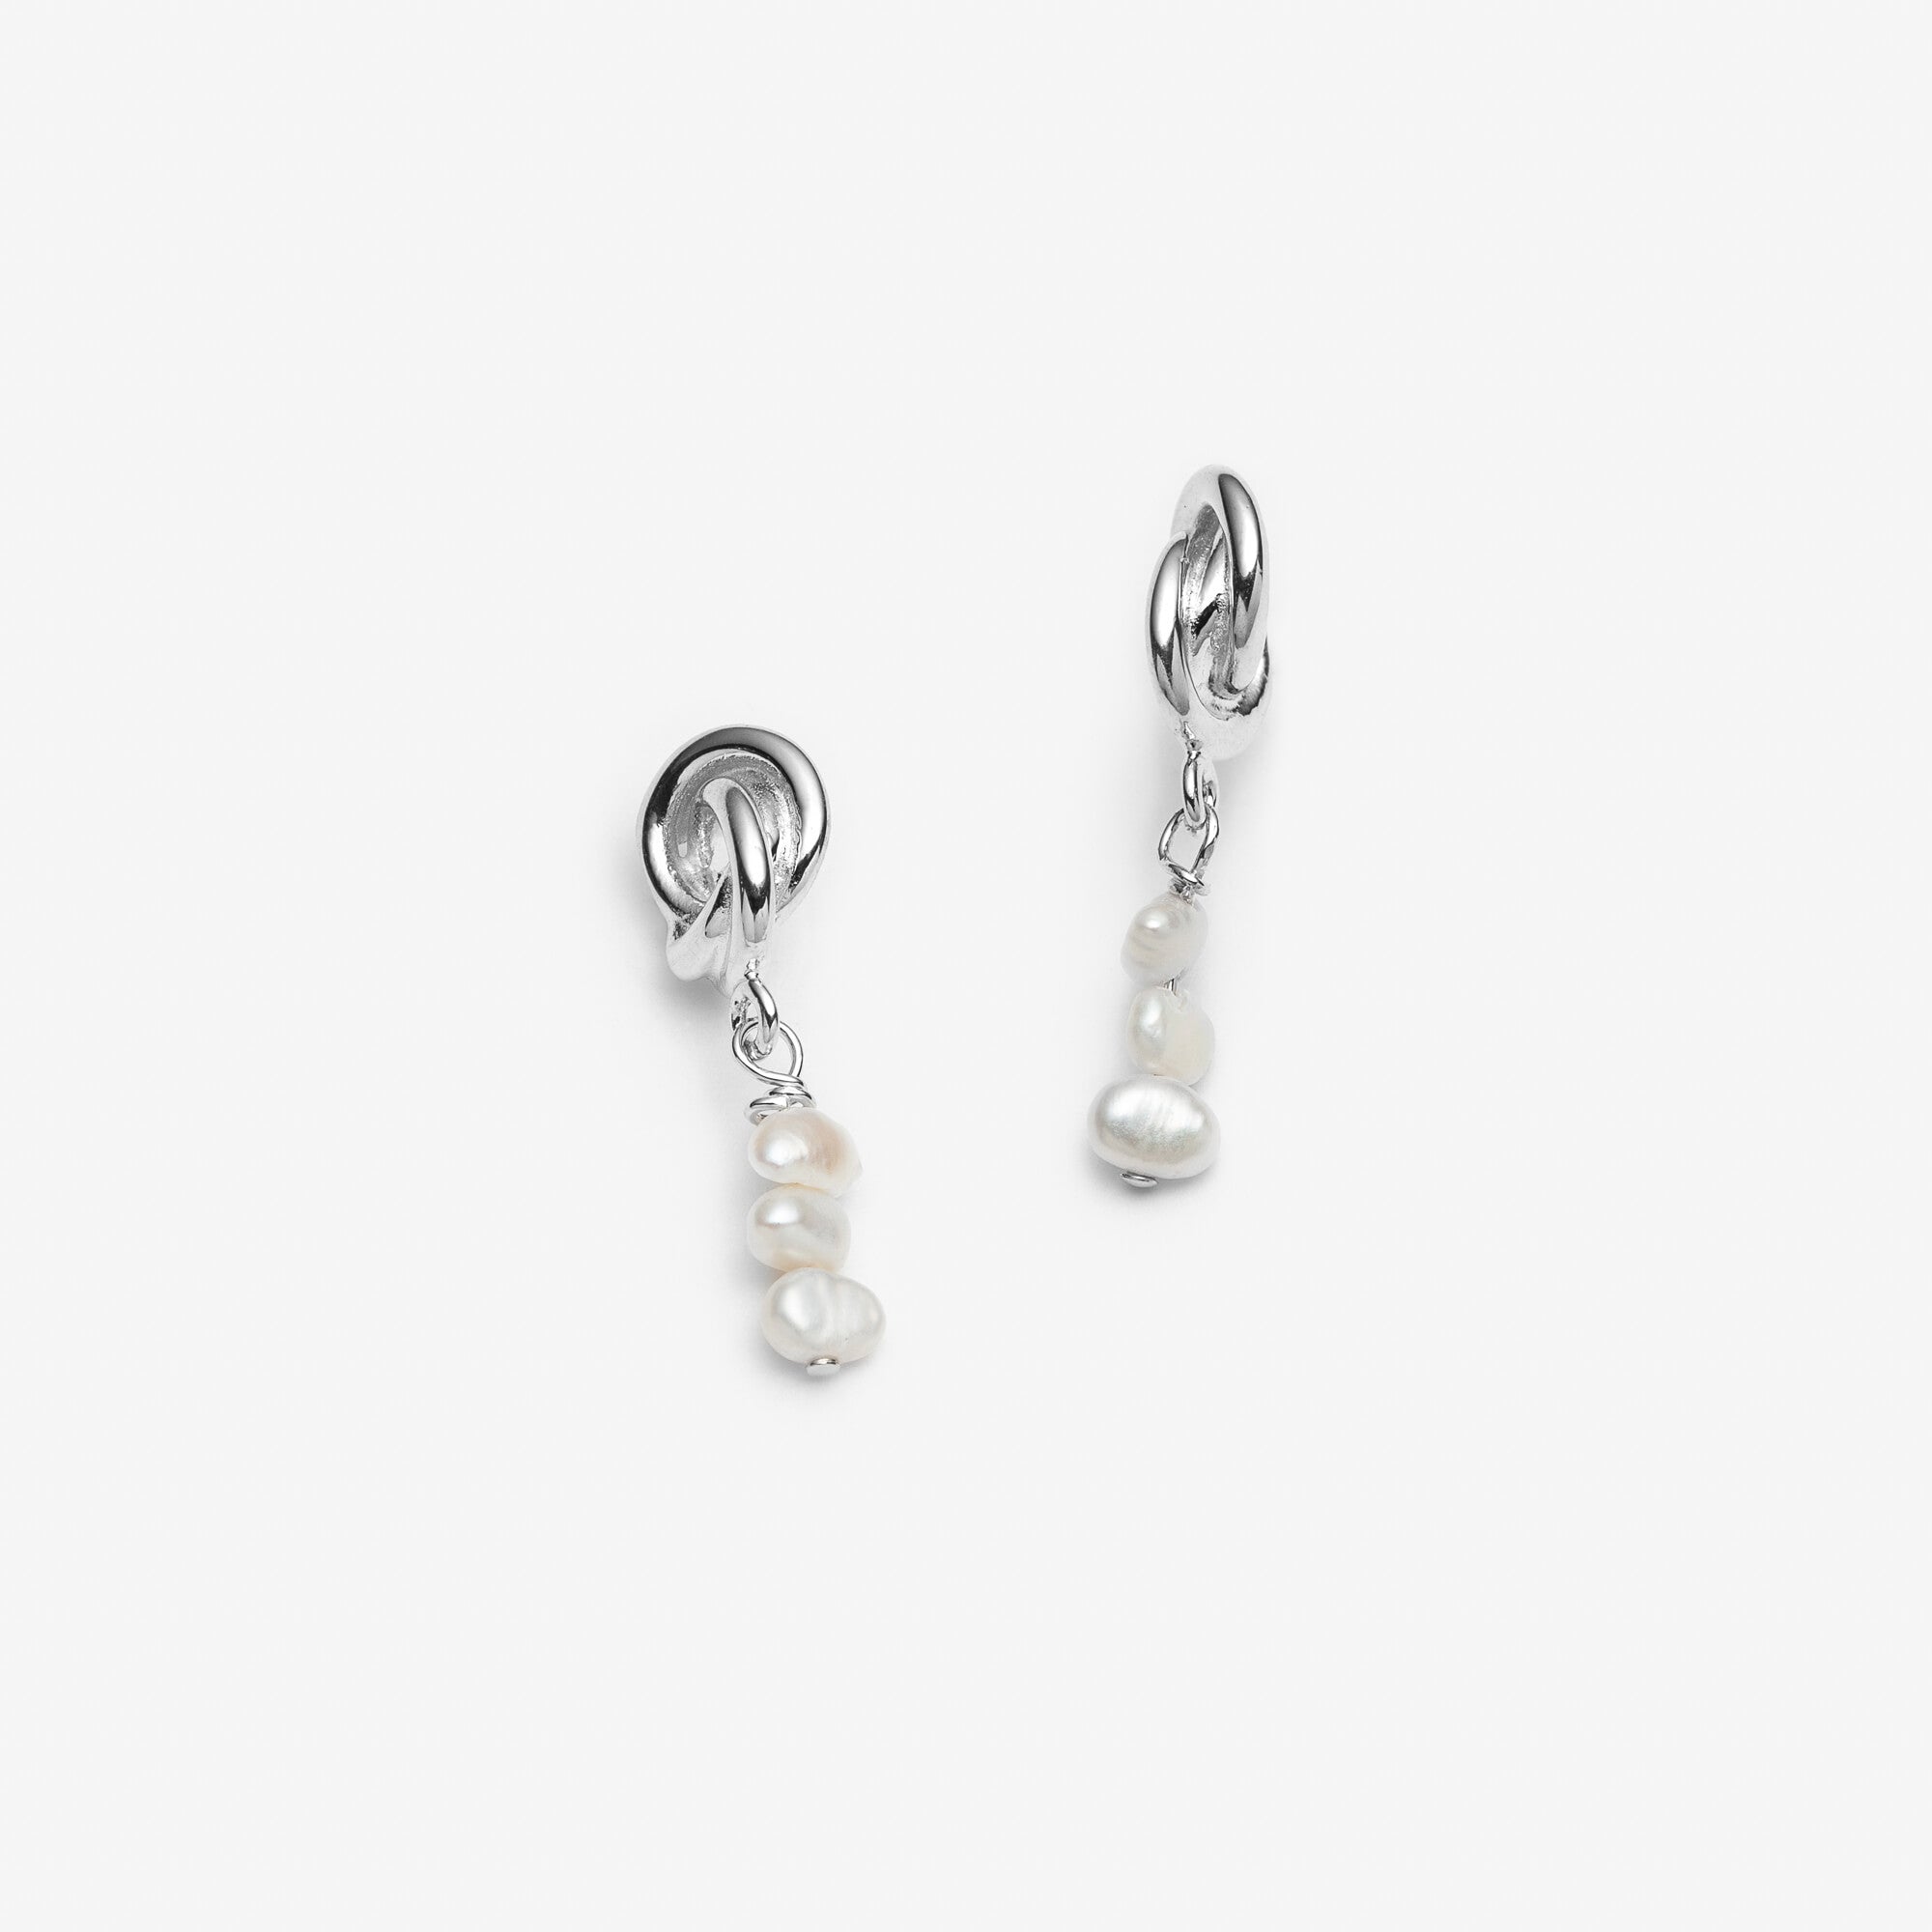 Enthousiaste - Knots Earrings With or Without Pearl Charm